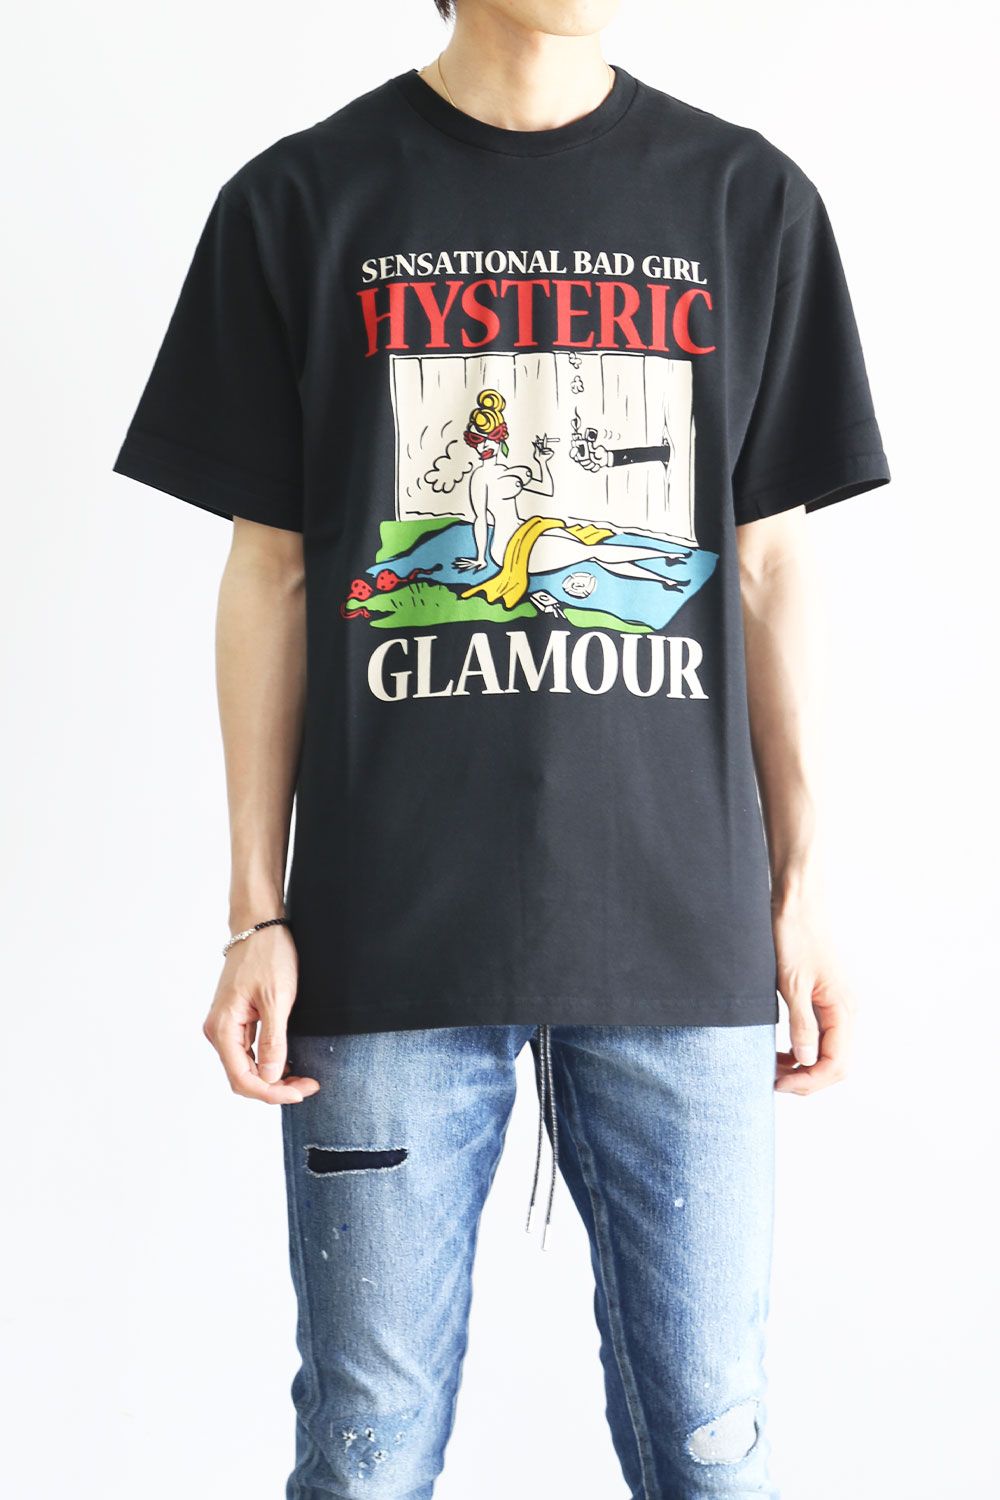 HYSTERIC GLAMOUR - MISS HYSTERIC GARDEN Tシャツ 